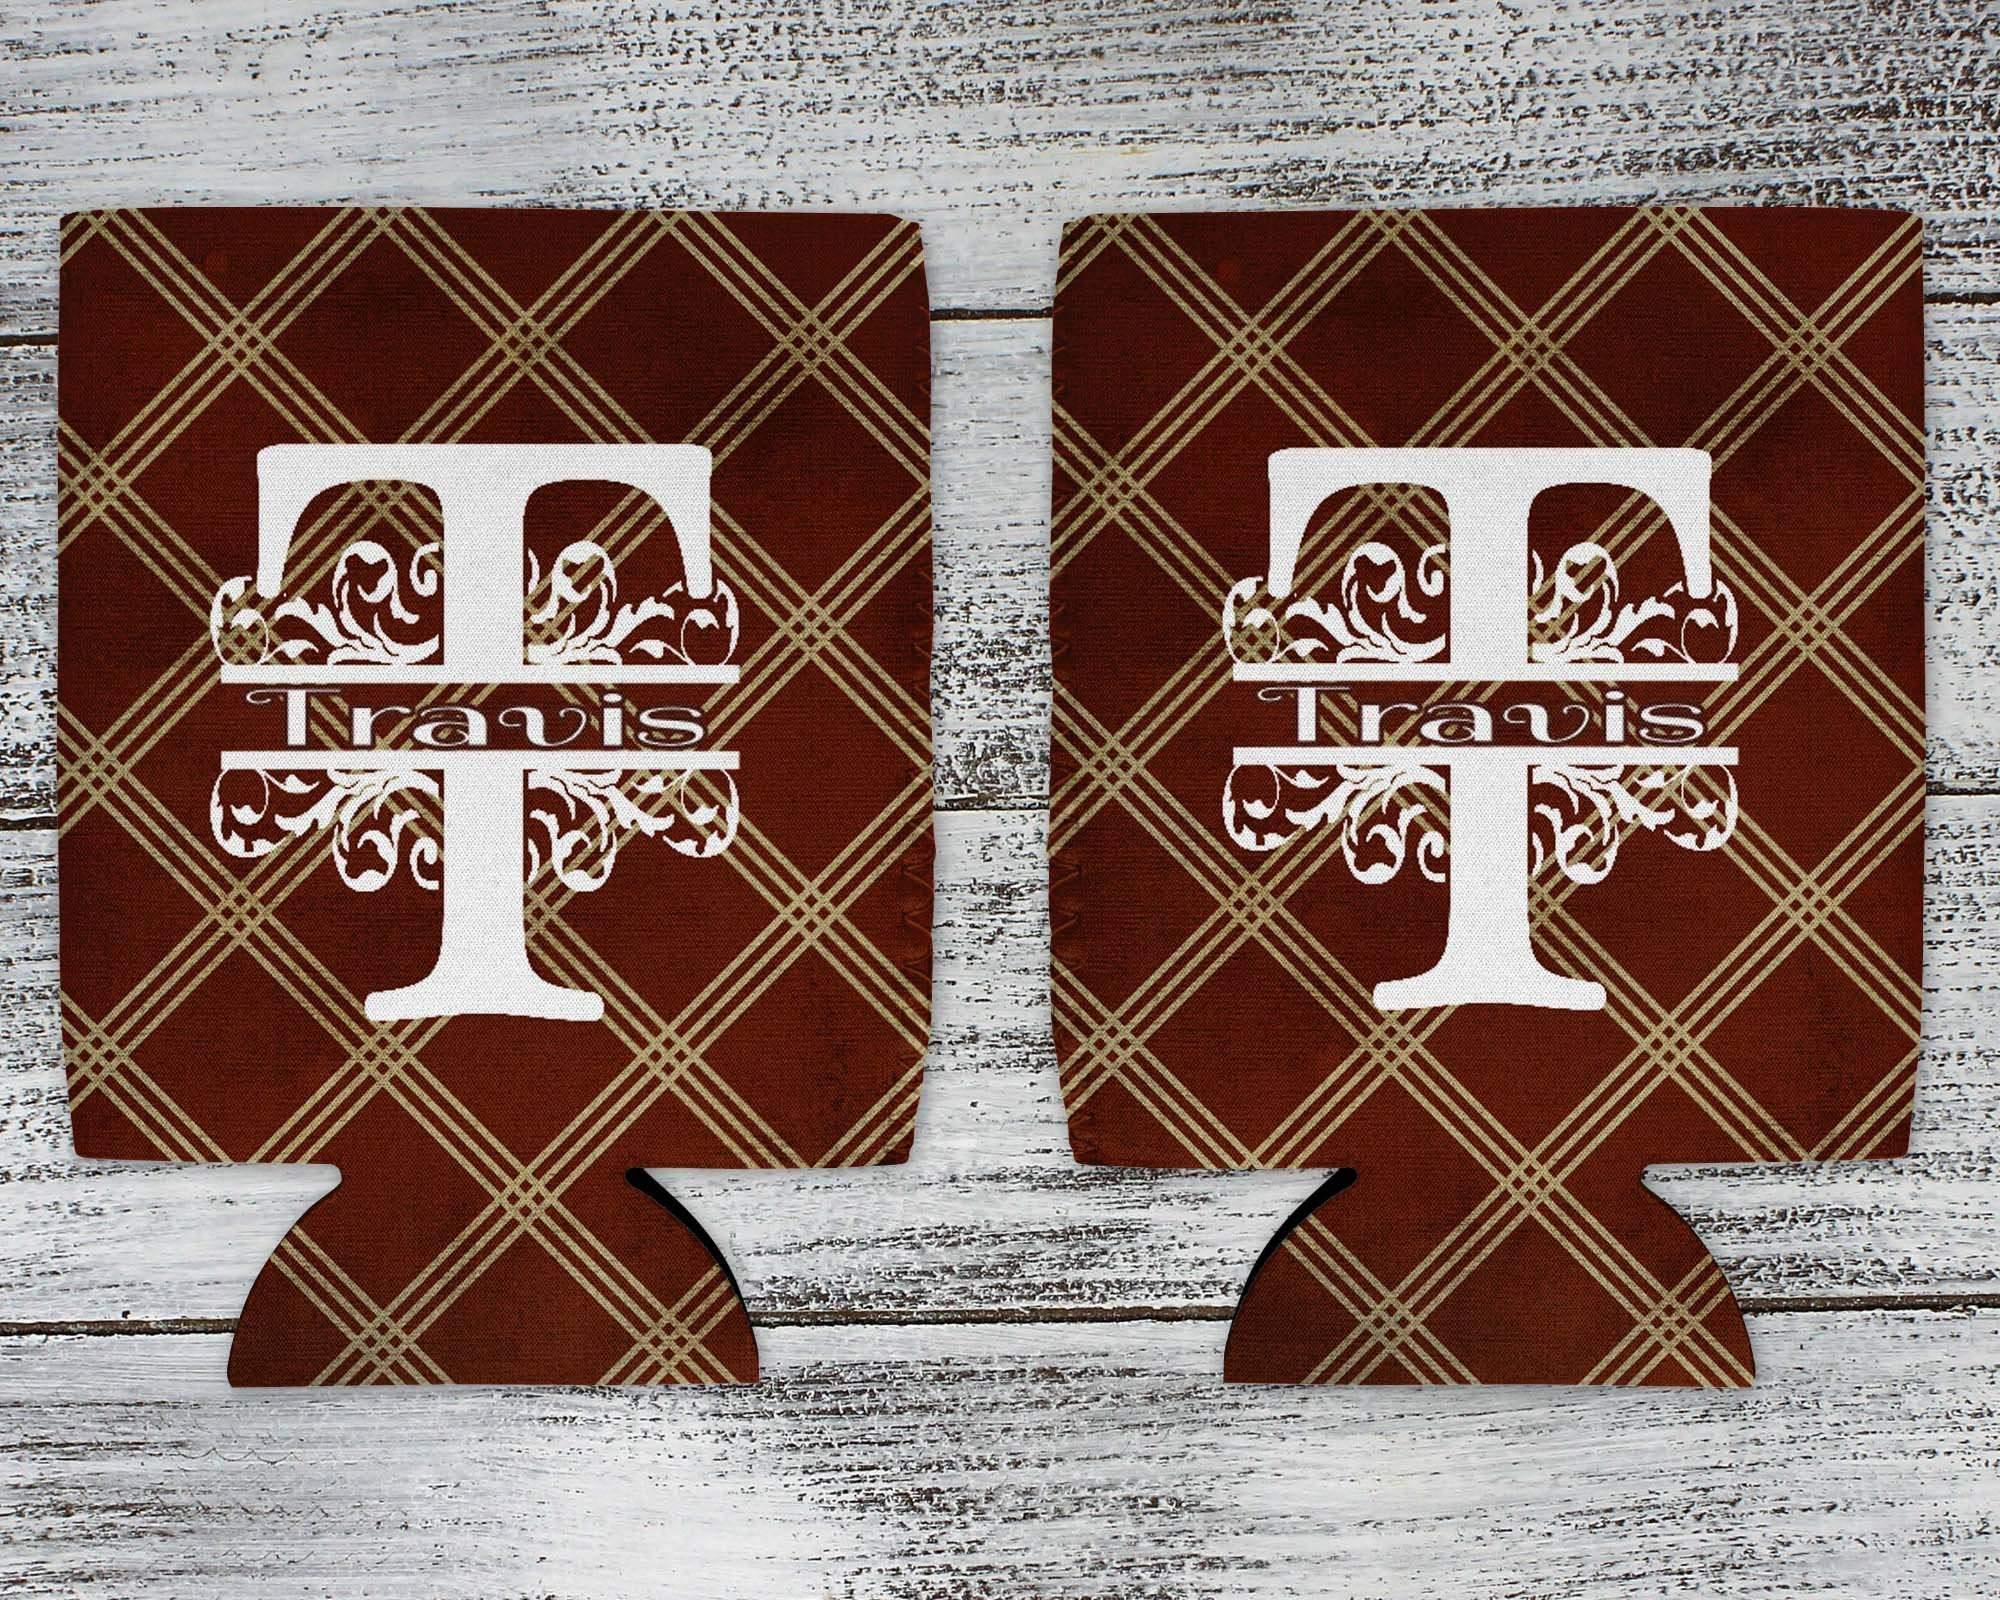 Personalized Drink Beverage Insulator | Monogrammed Cozie | Brown Argyle - This & That Solutions - Personalized Drink Beverage Insulator | Monogrammed Cozie | Brown Argyle - Personalized Gifts & Custom Home Decor